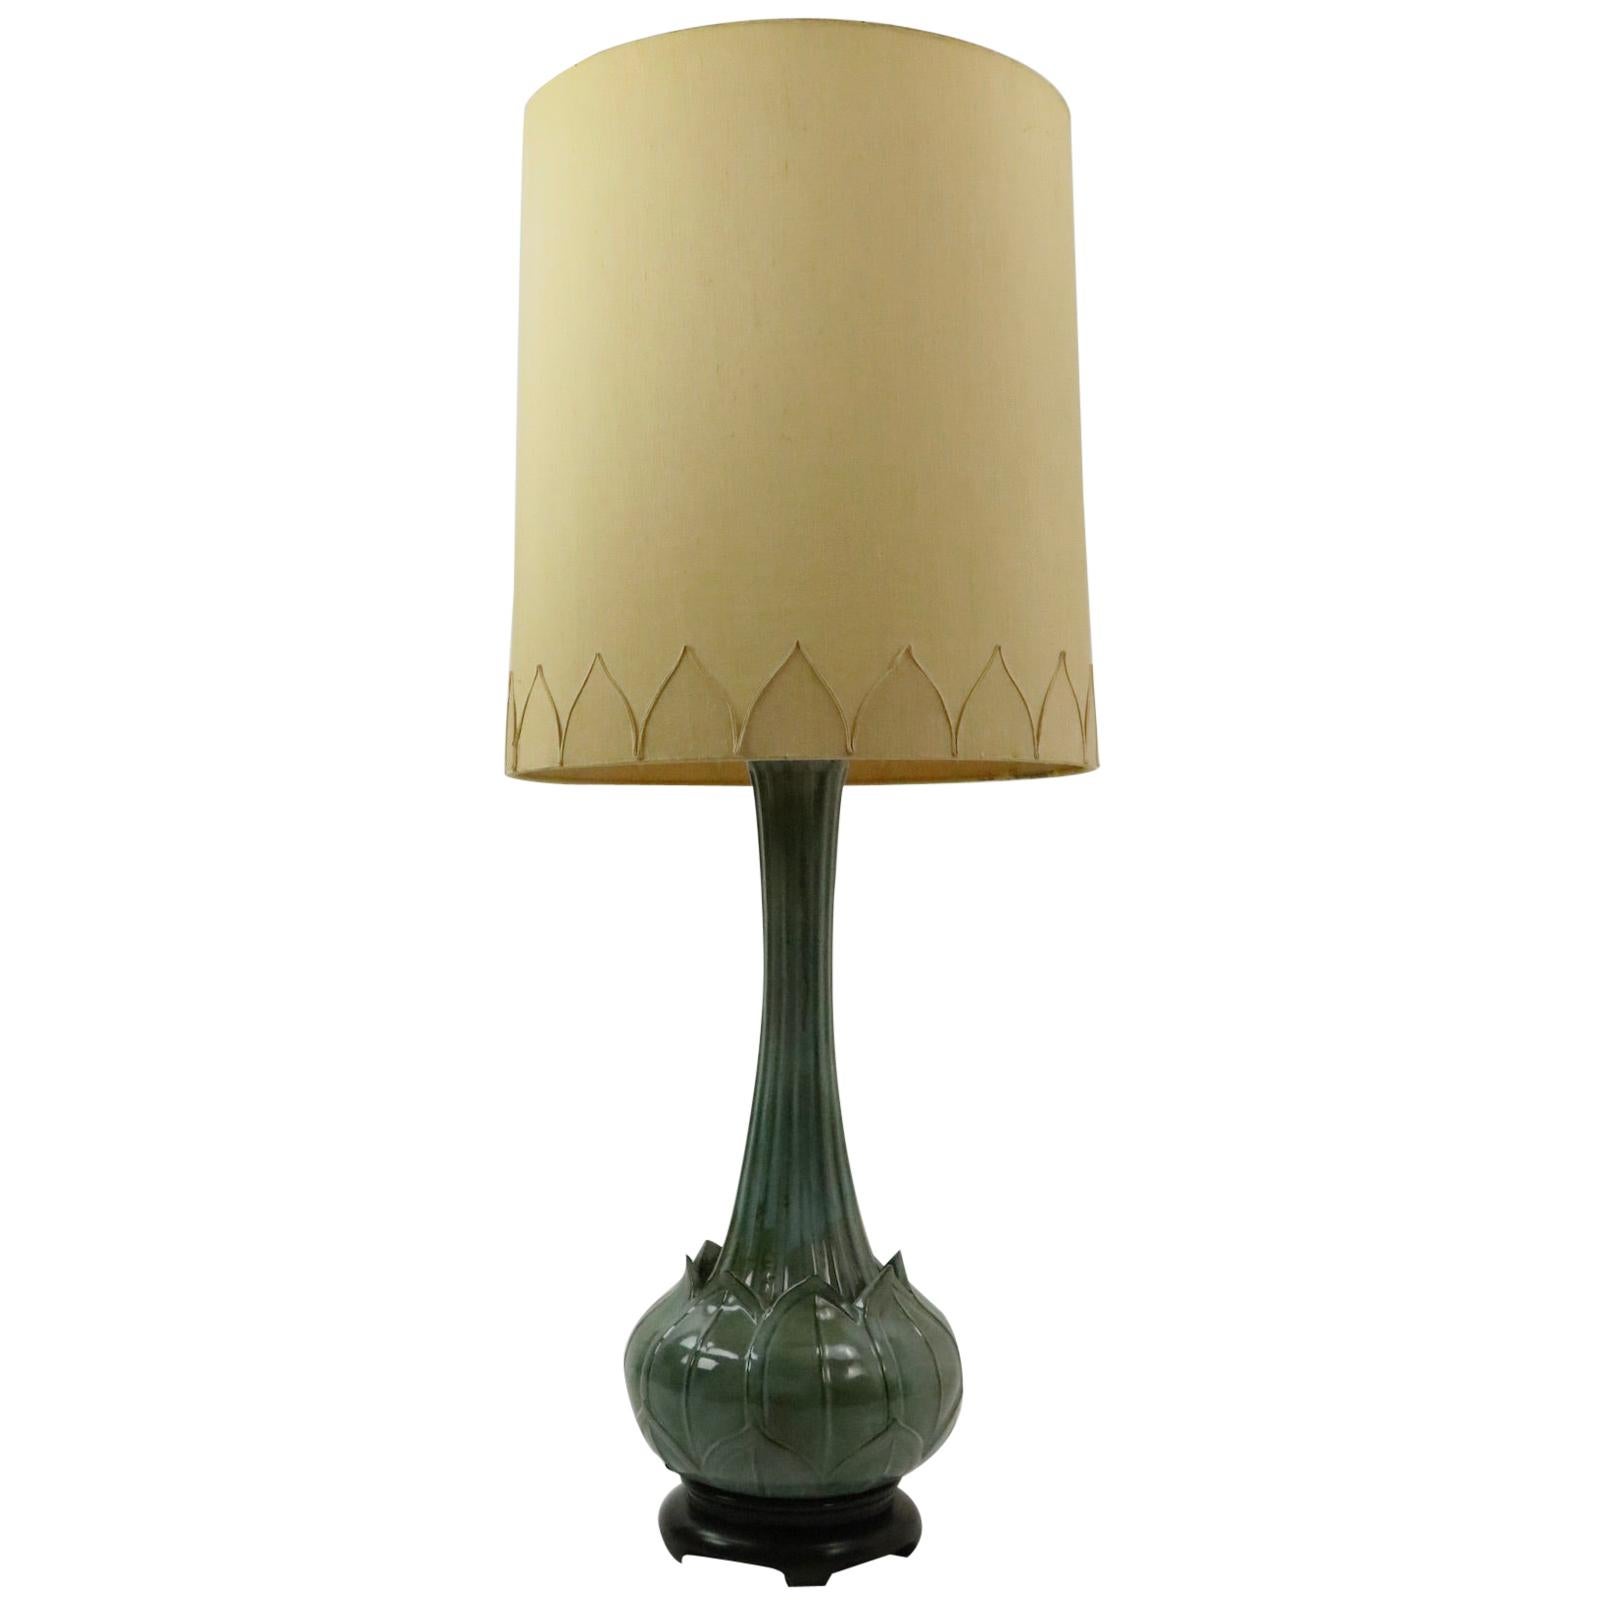 Large Ceramic Asian Influence Lotus Form Table Lamp